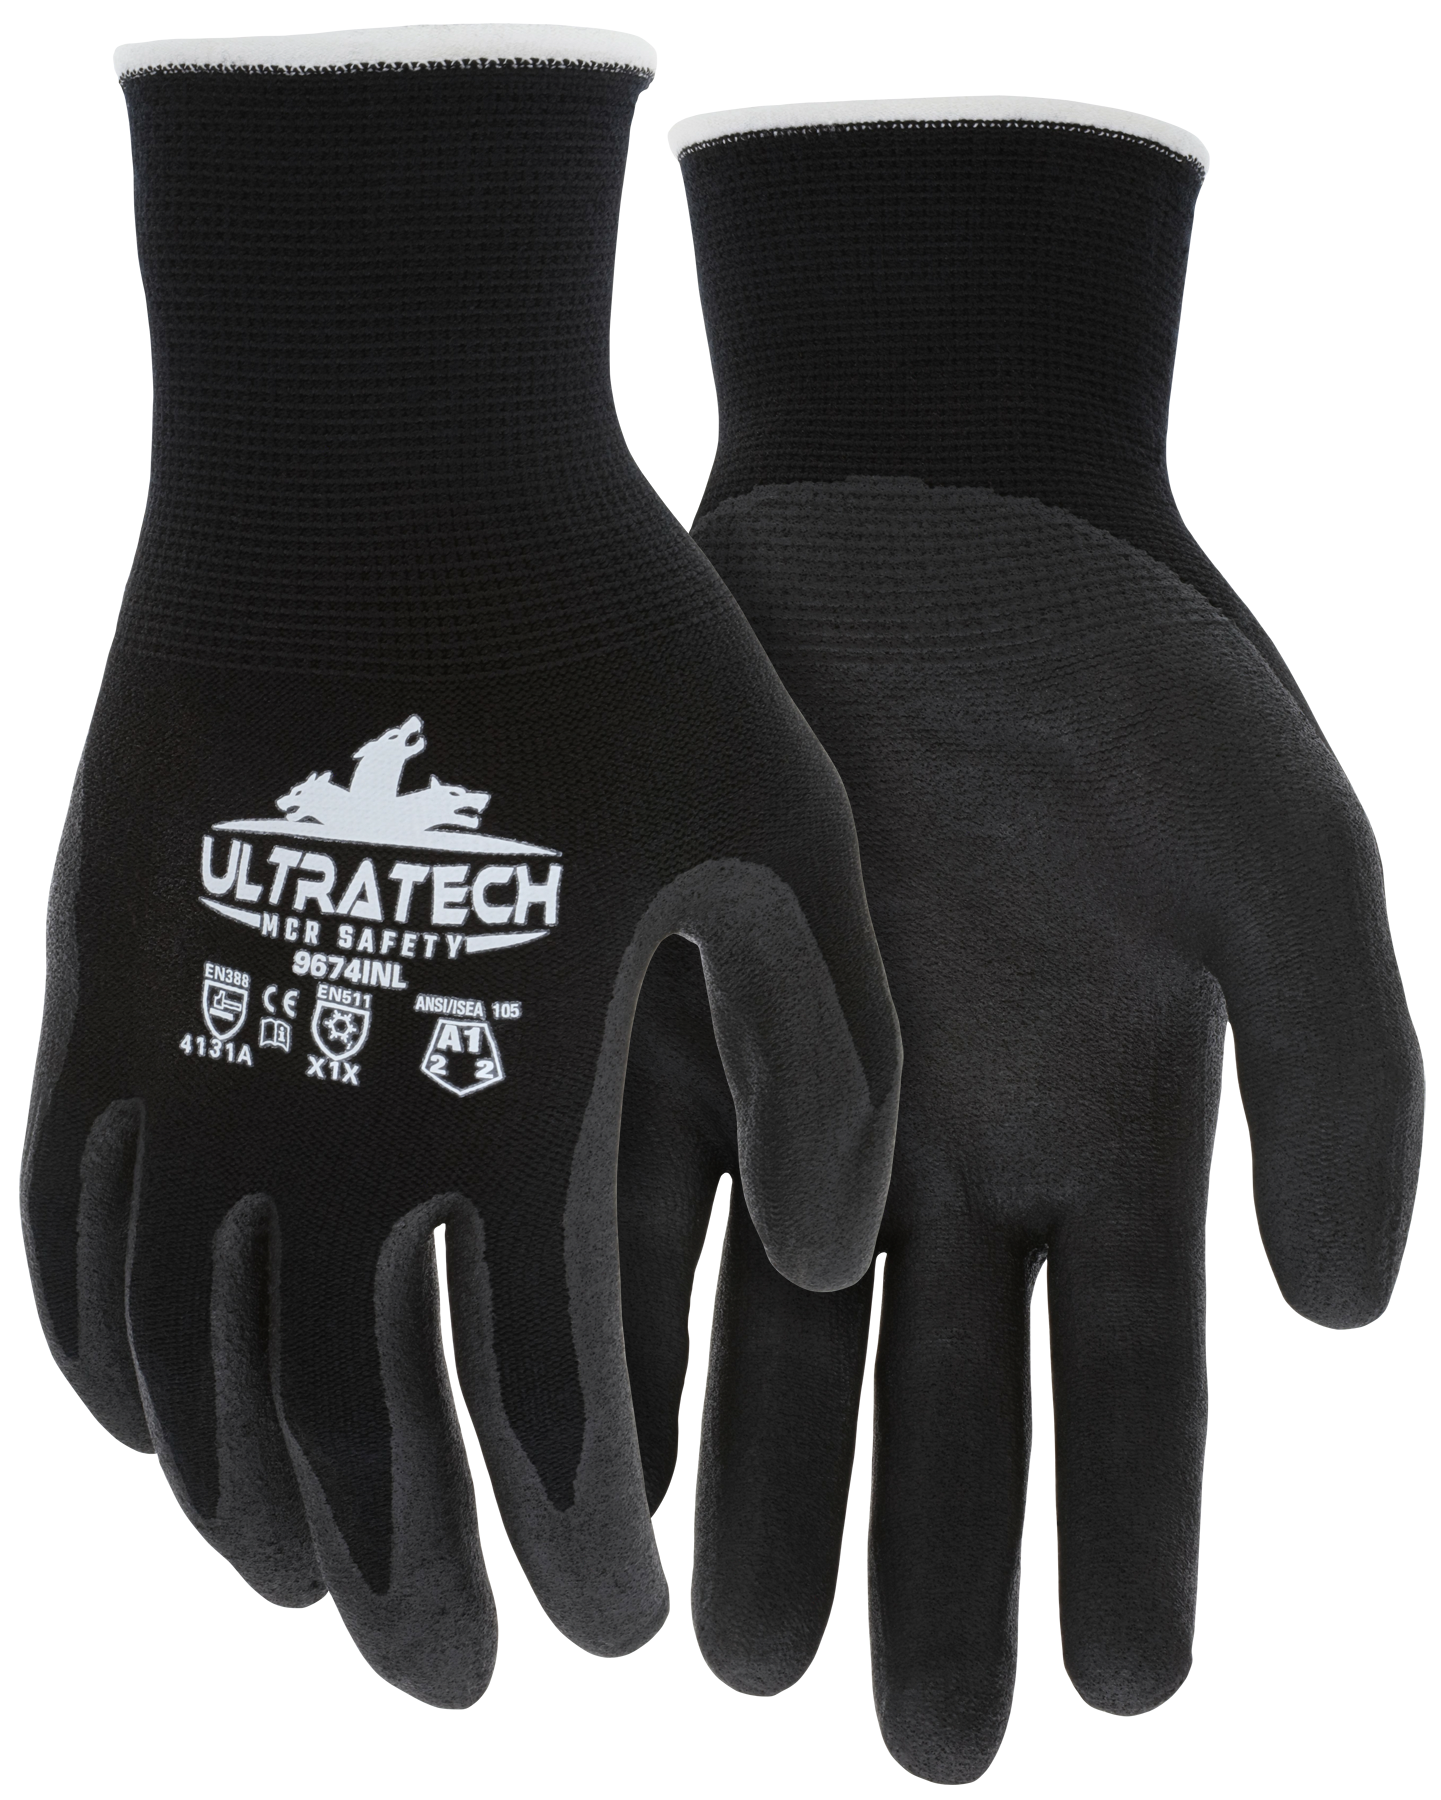 The Best Plumbing Gloves to Protect Your Hands on the Job